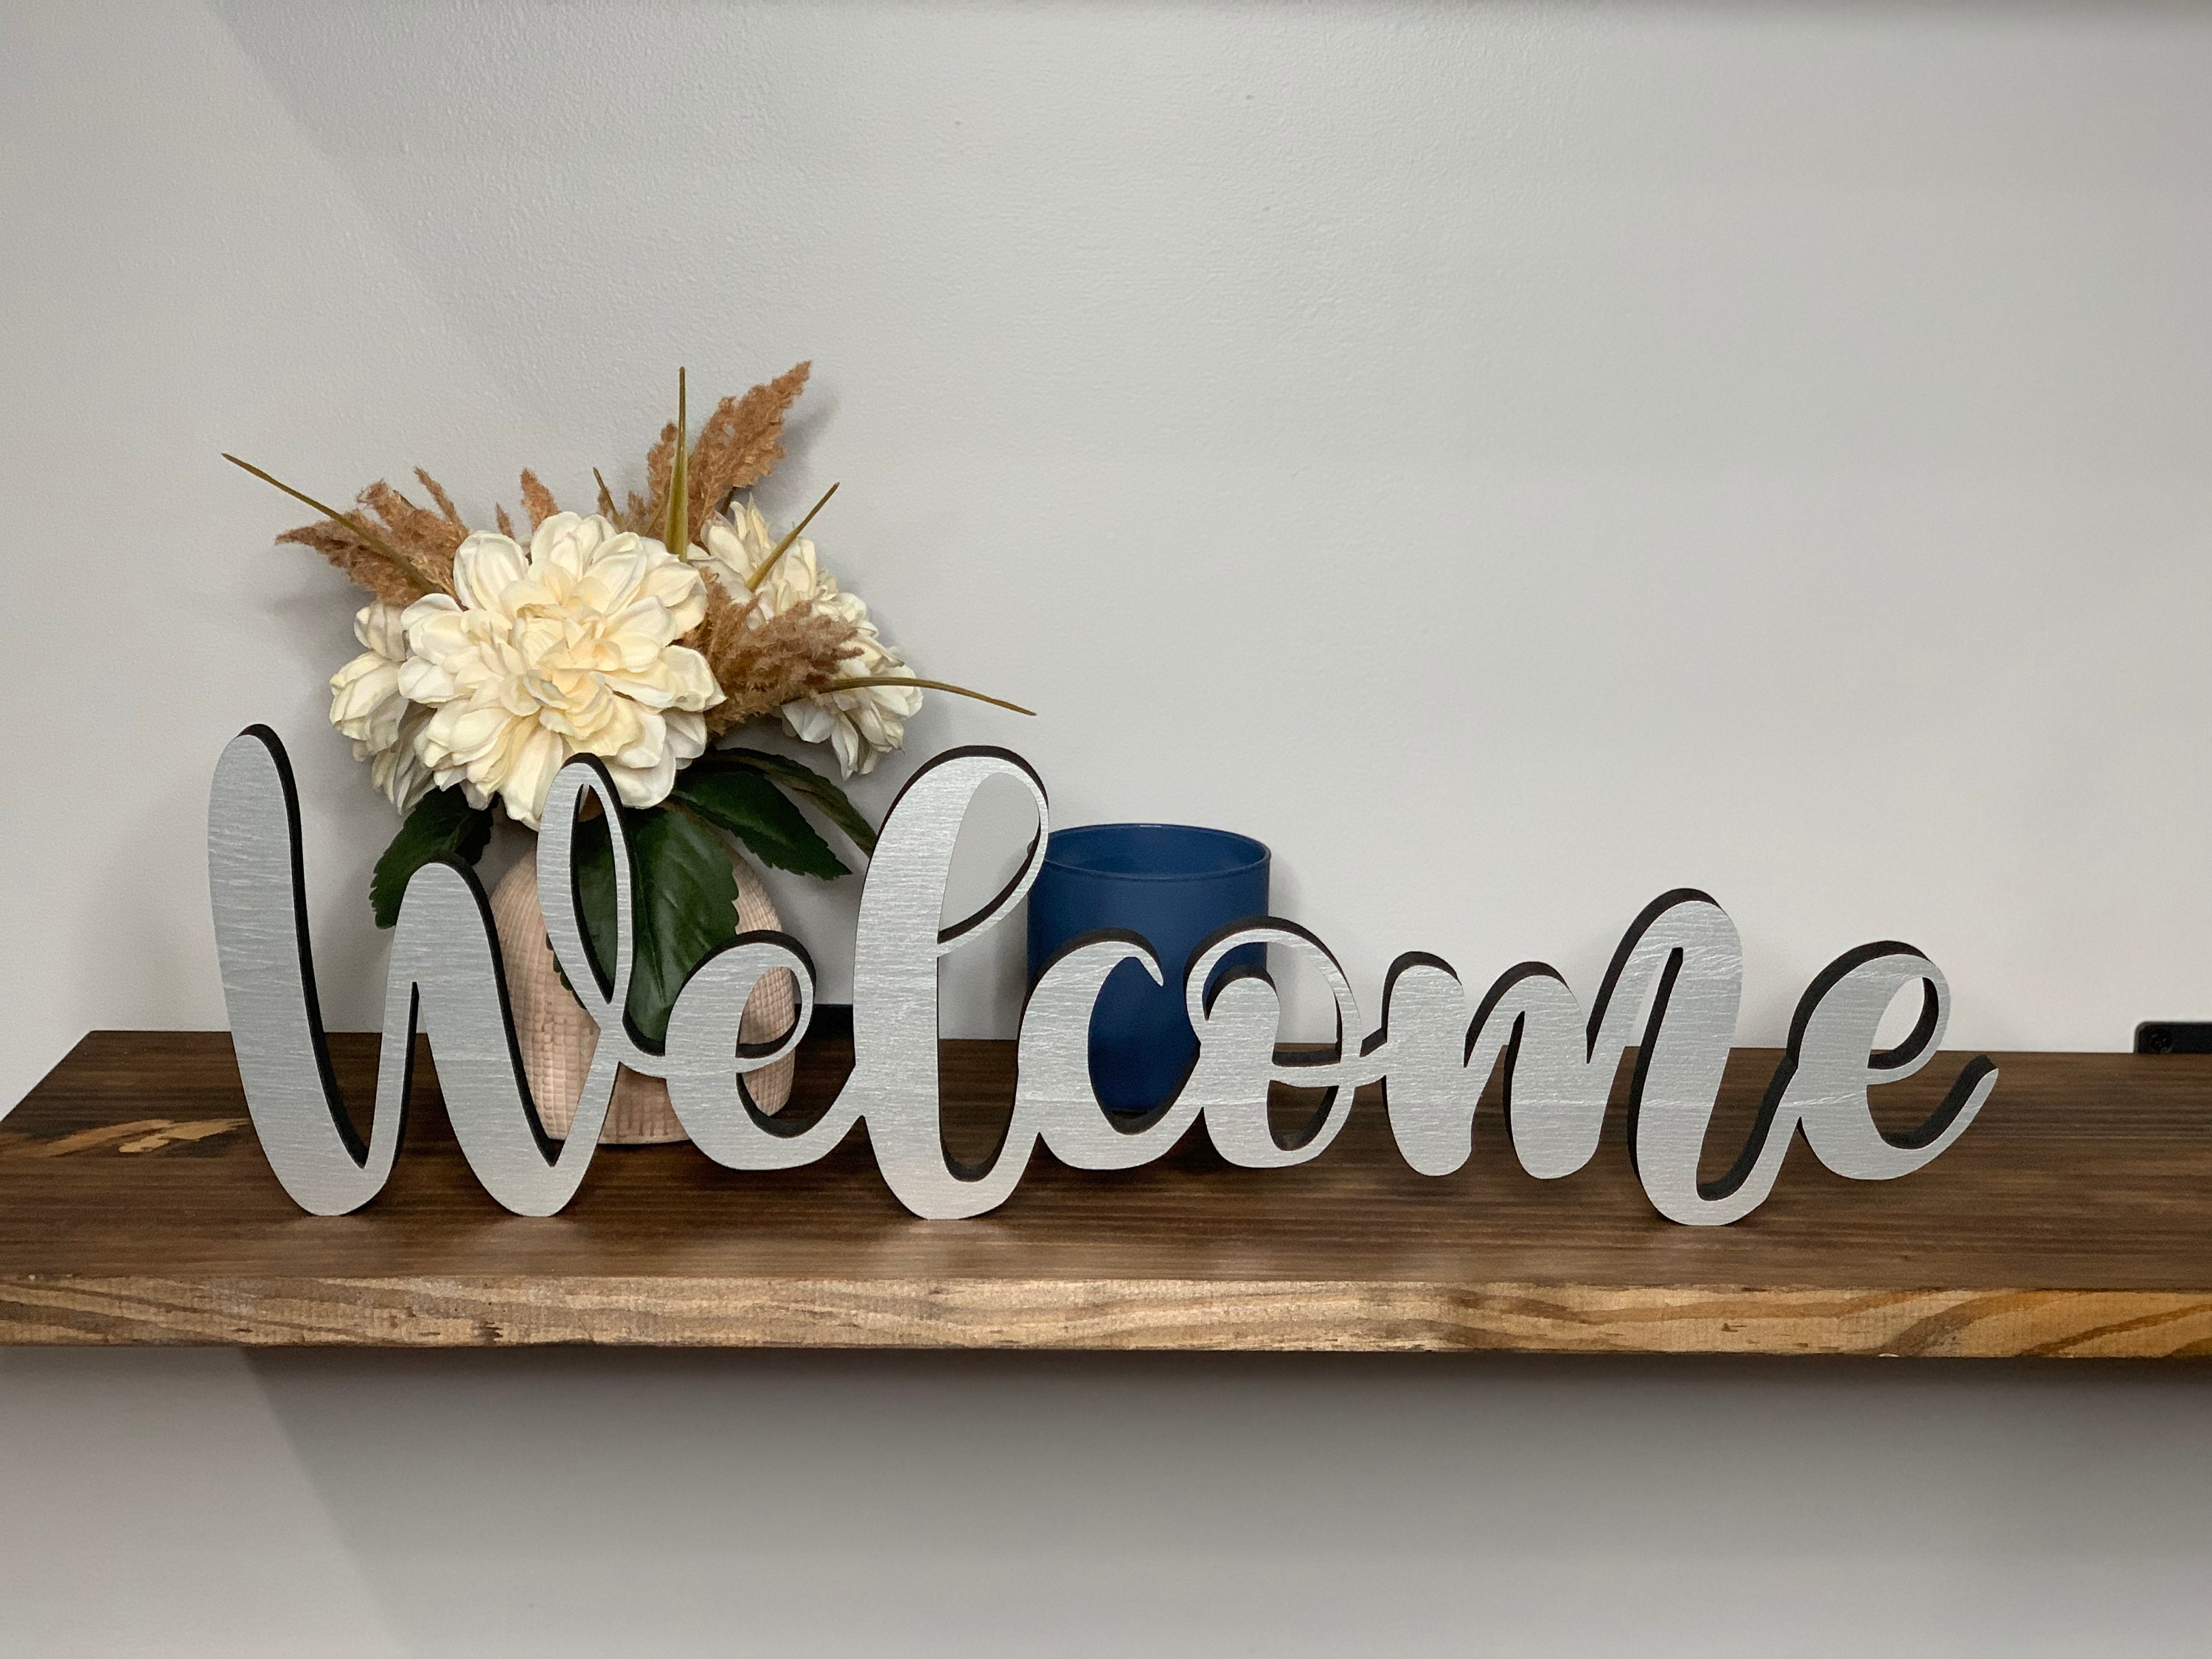 Designs ByLITA Visitors Welcome Table Or Counter Sign With Easel Stand, 6  X 8